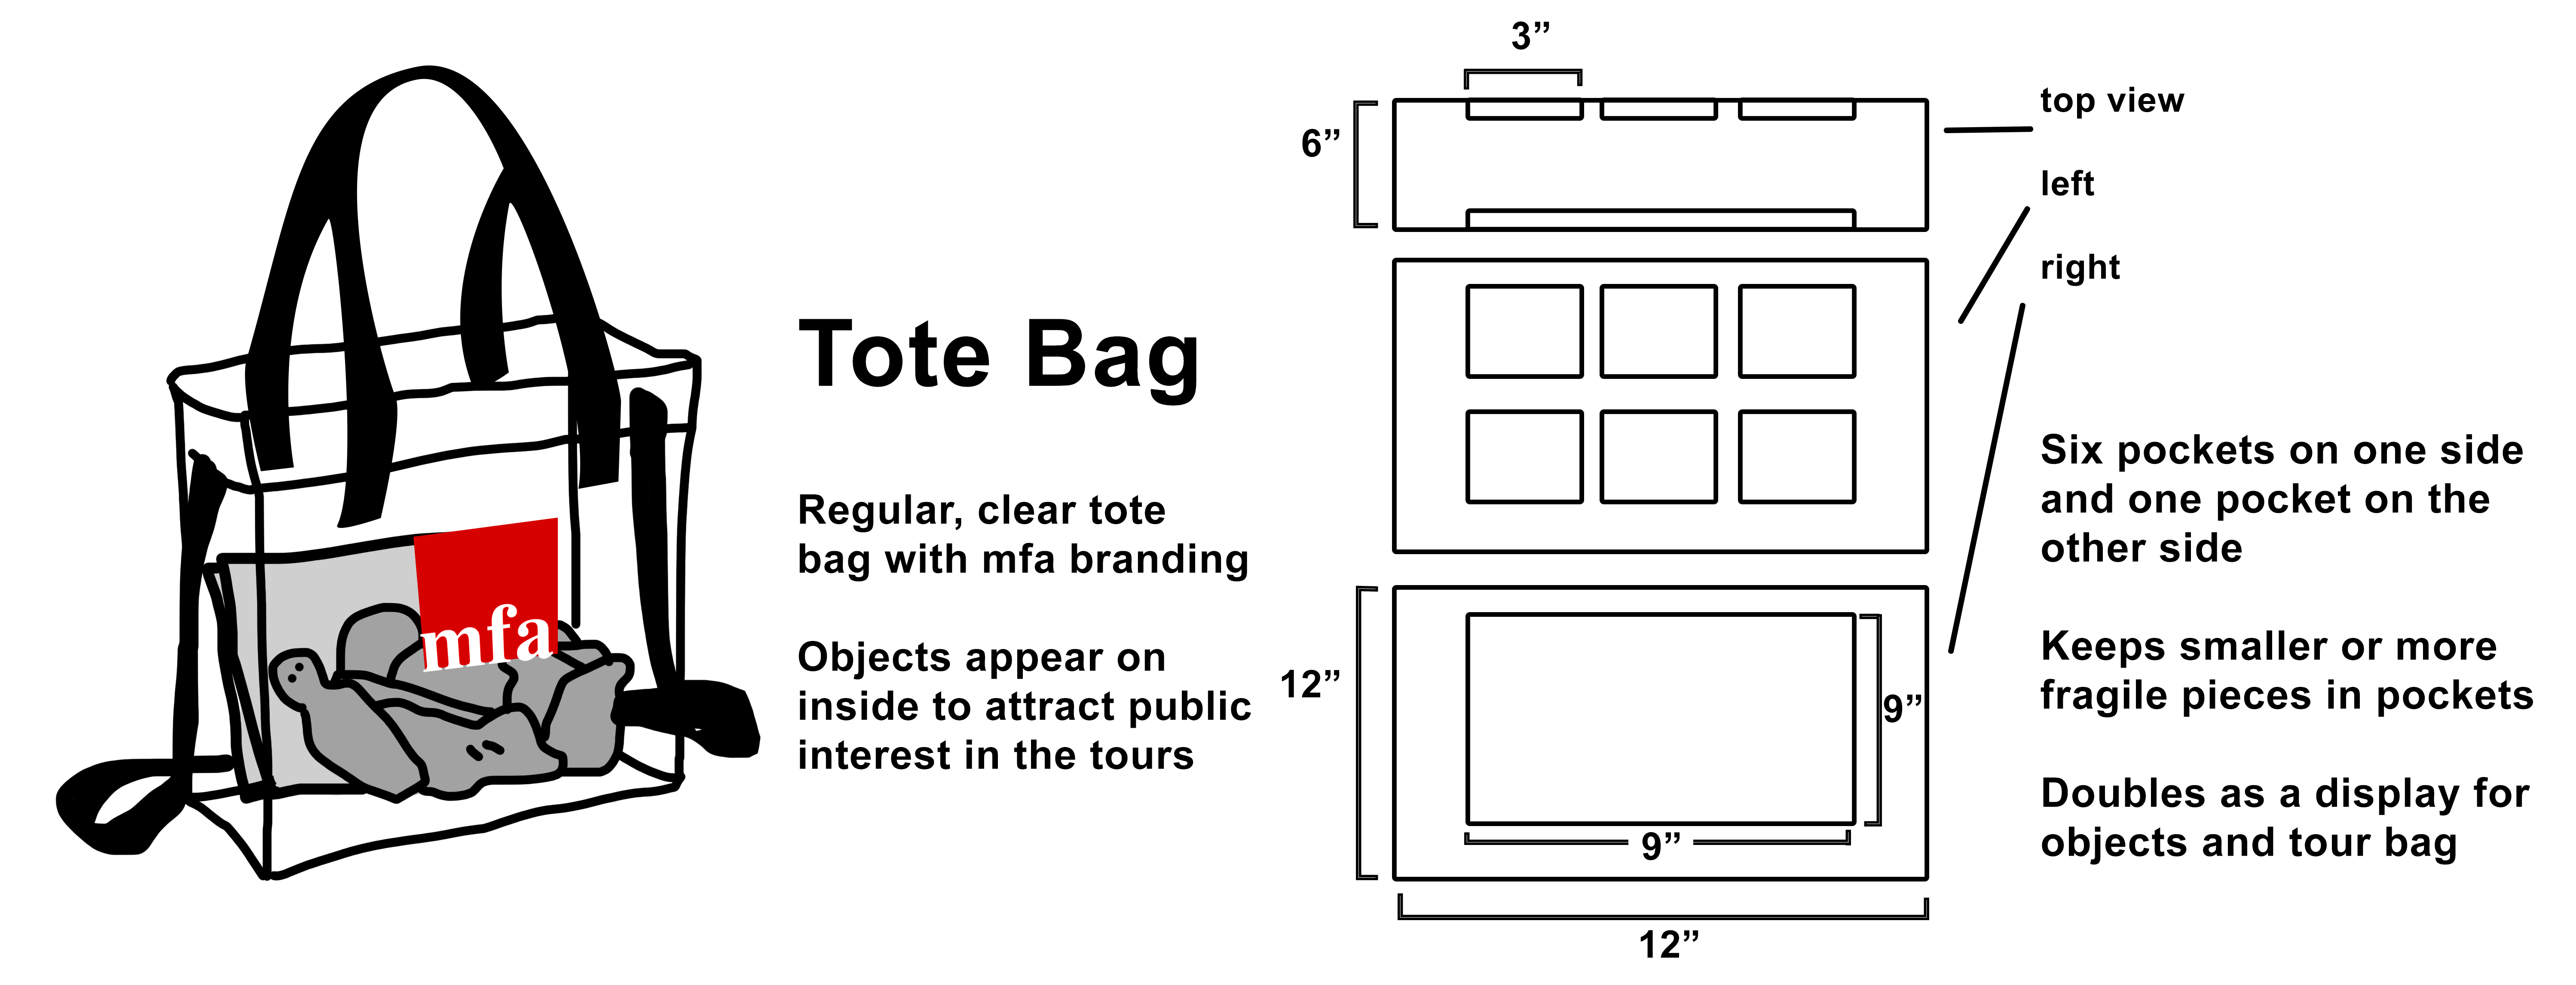 Illustration of tactile tote bag with mfa logo and dimensions.